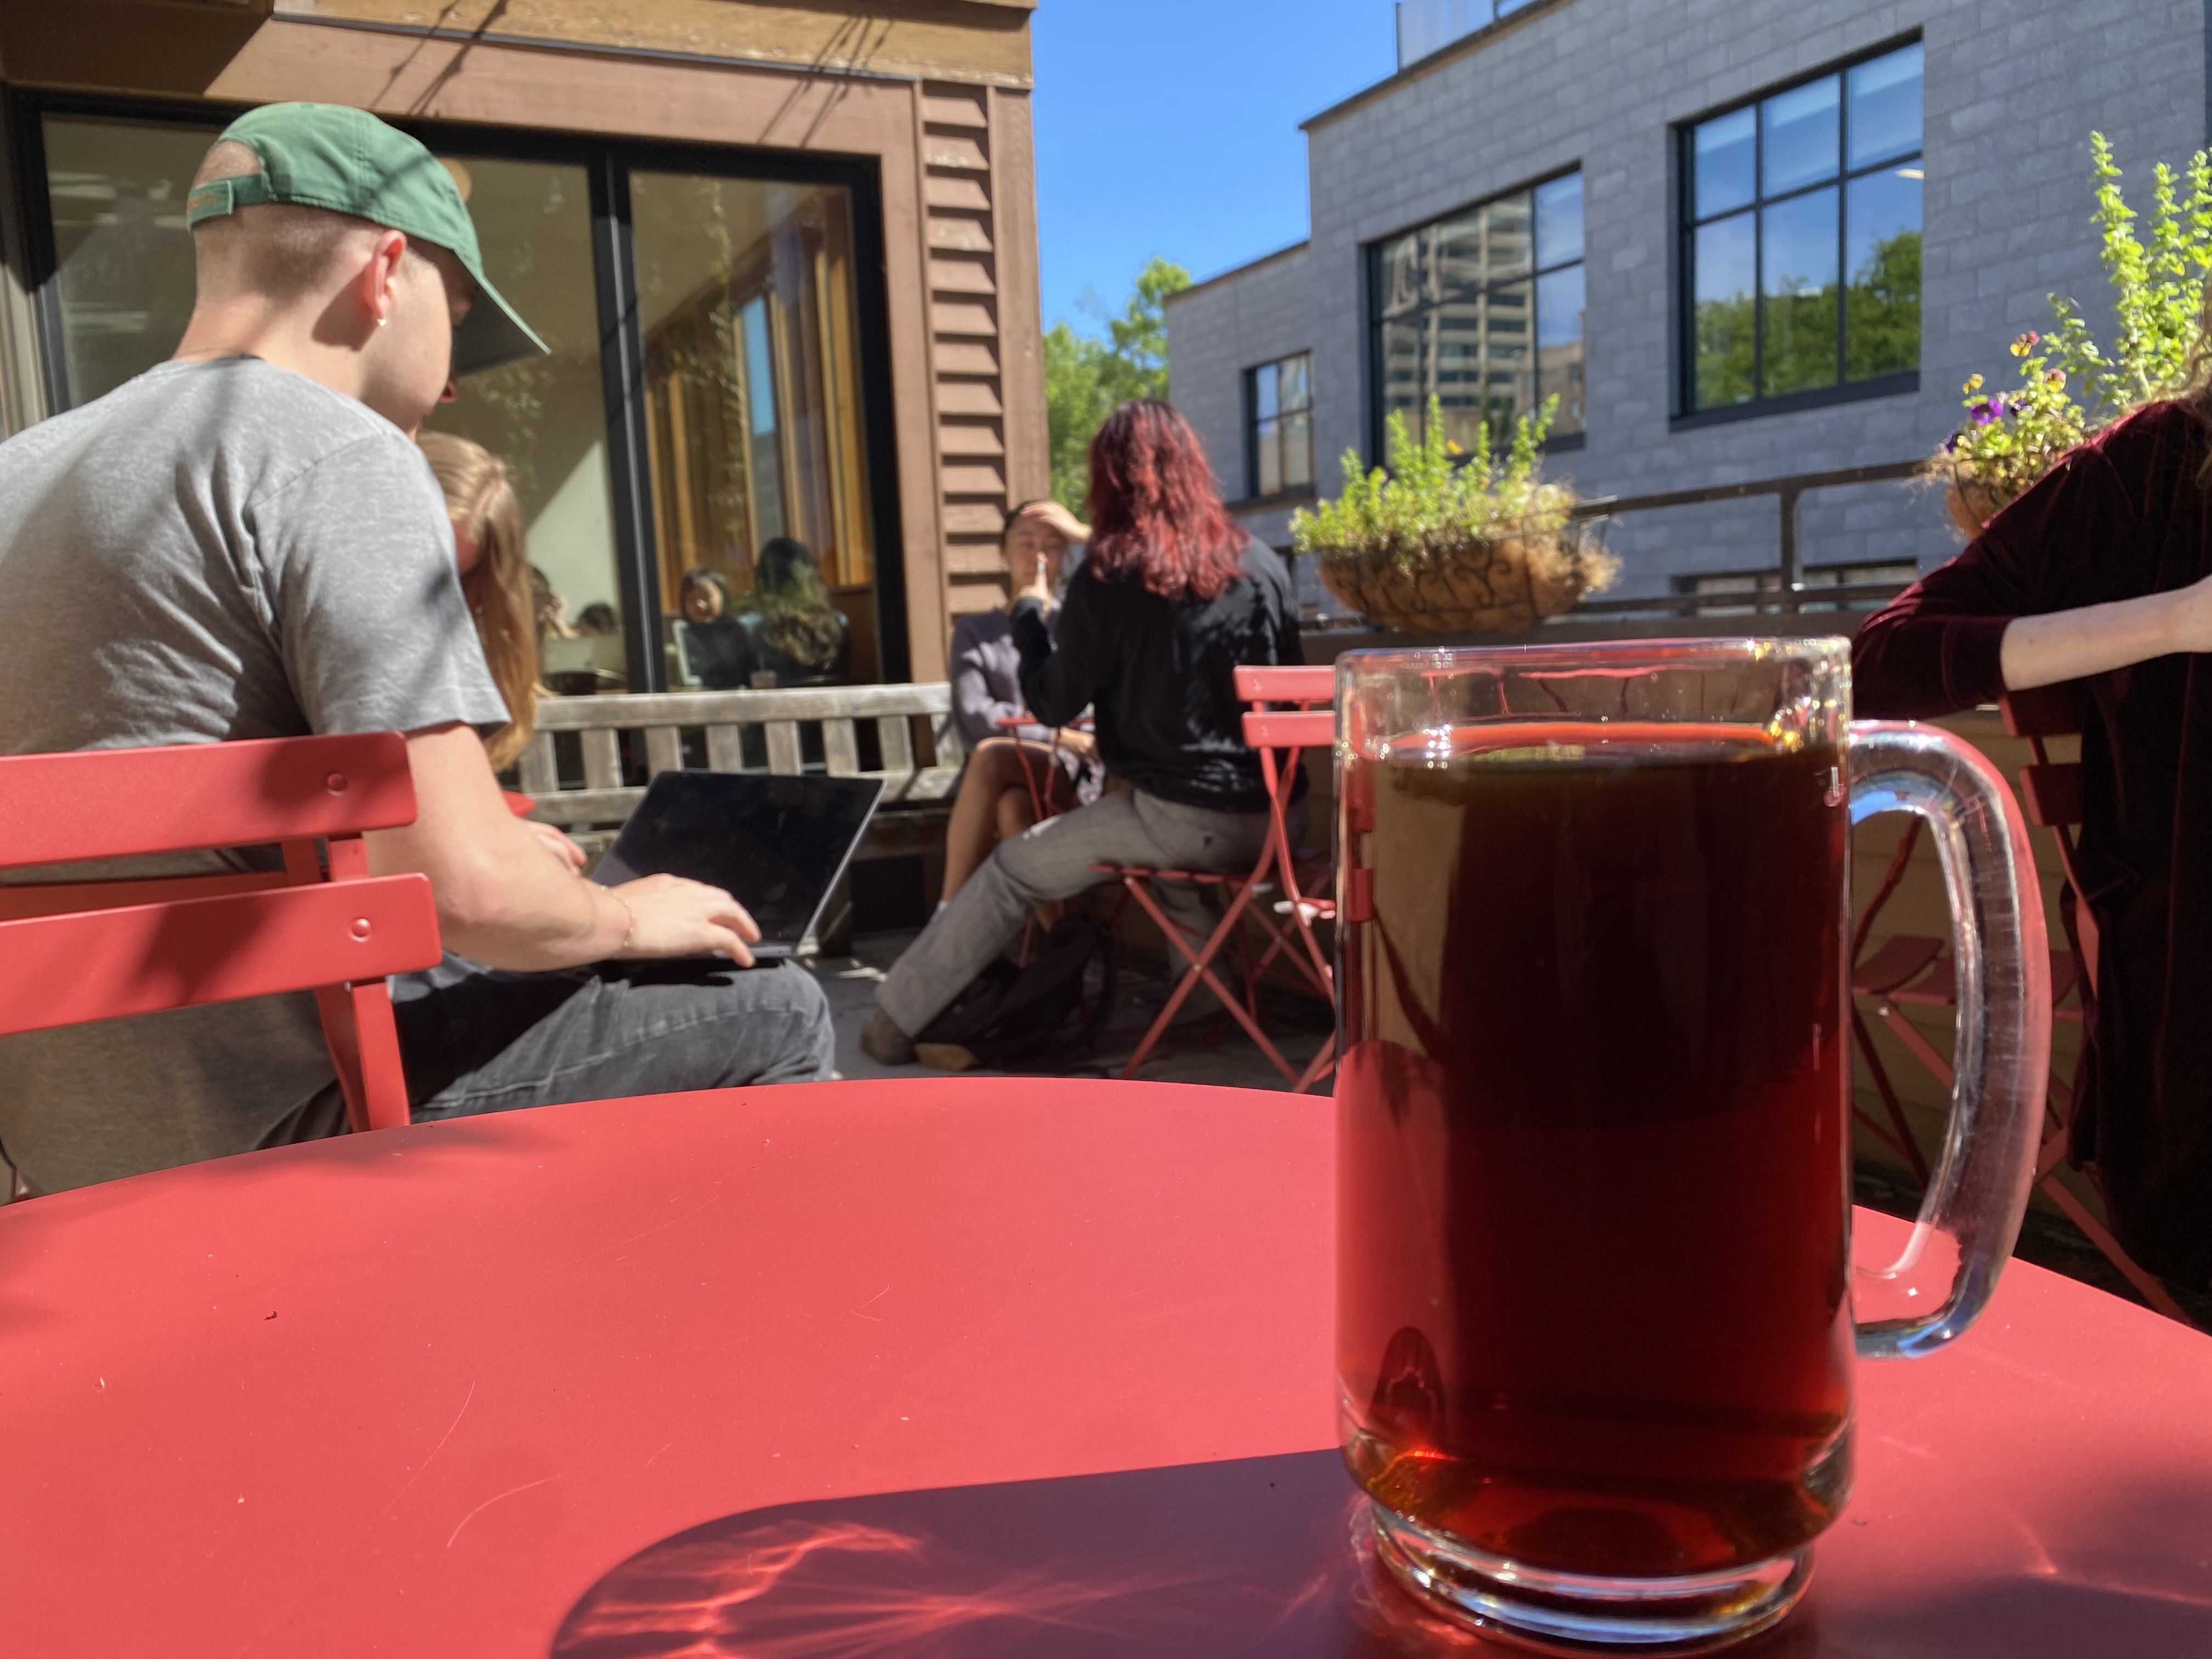 A glass mug full of black coffee sitting on an outdoor red table, with people at tables in the background and some plants on the edge of a wall.